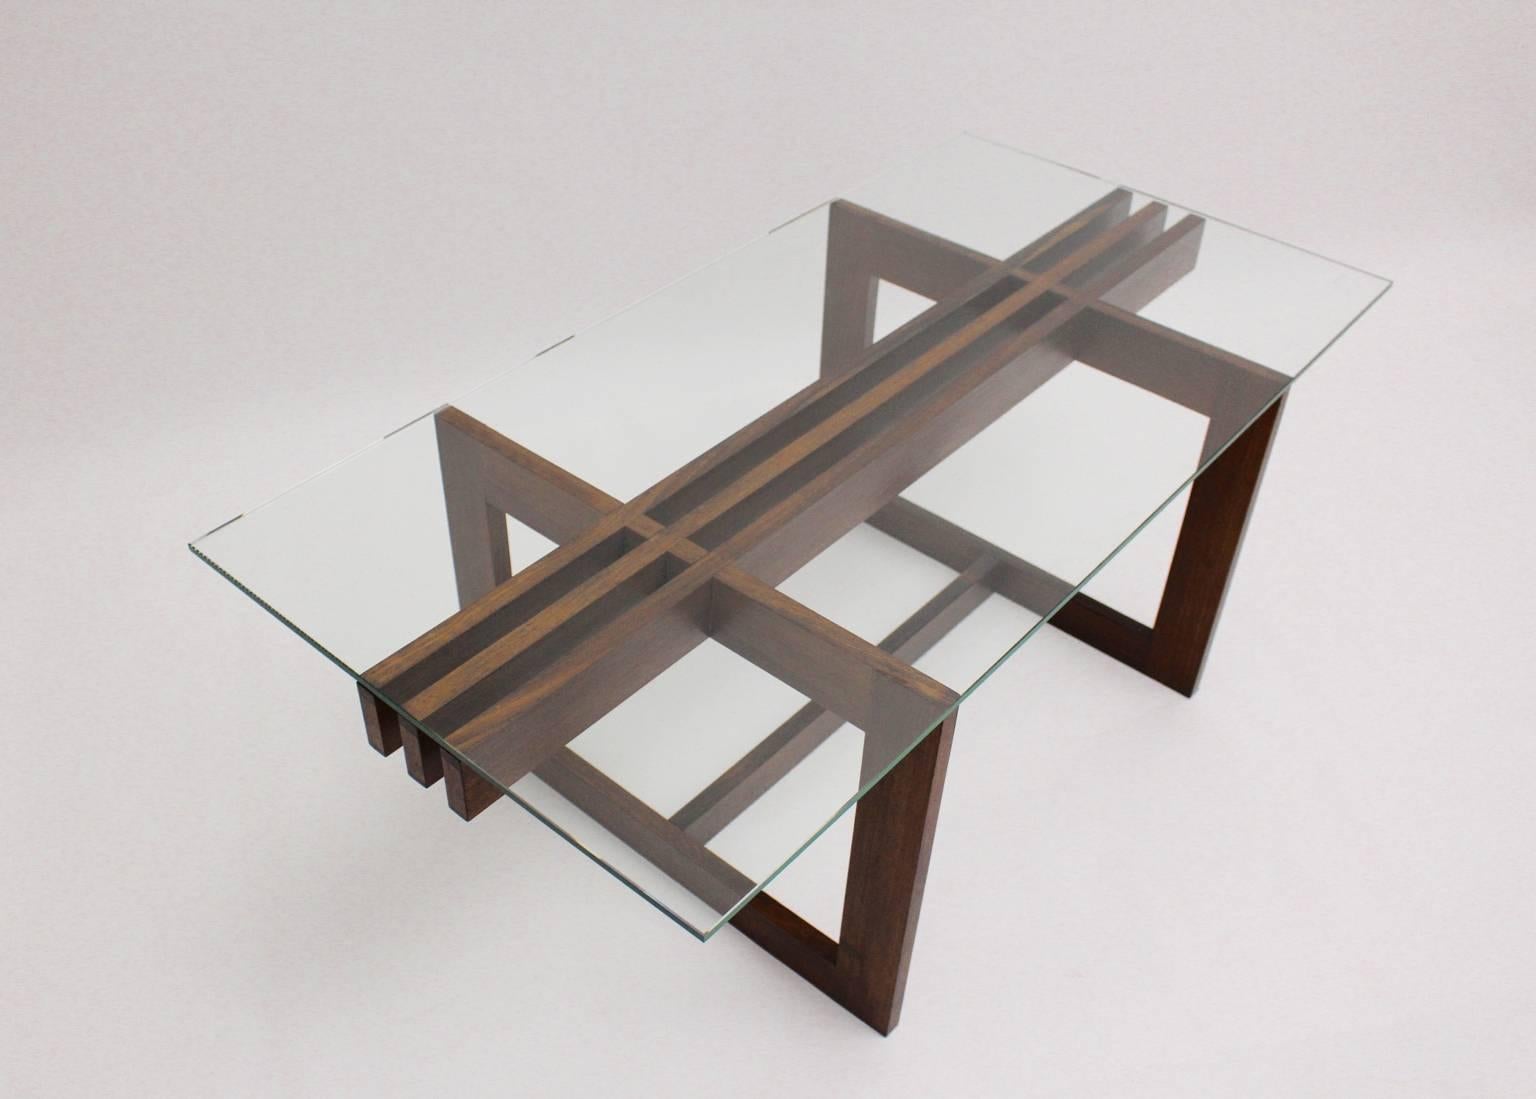  Scandinavian Modern vintage teak coffee table, which shows a geometric base construction with a clear glass top ( thickness 0.39 in ).
All measures are approximate.